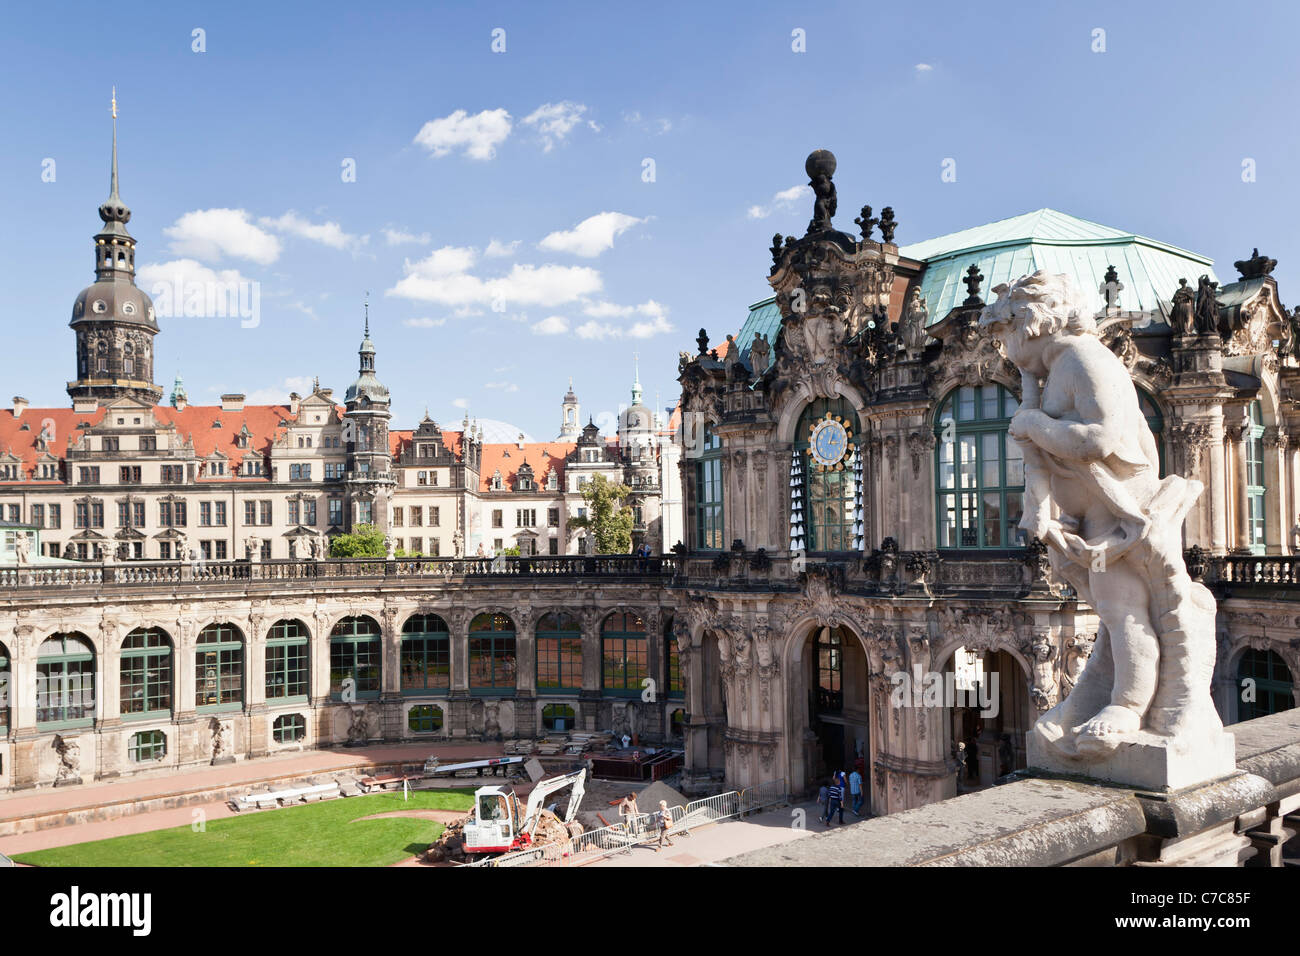 View from the roof of the Zwinger palace at the chime pavilion (Glockenspielpavillion) - Dresden, Saxonia, Germany, Europe Stock Photo